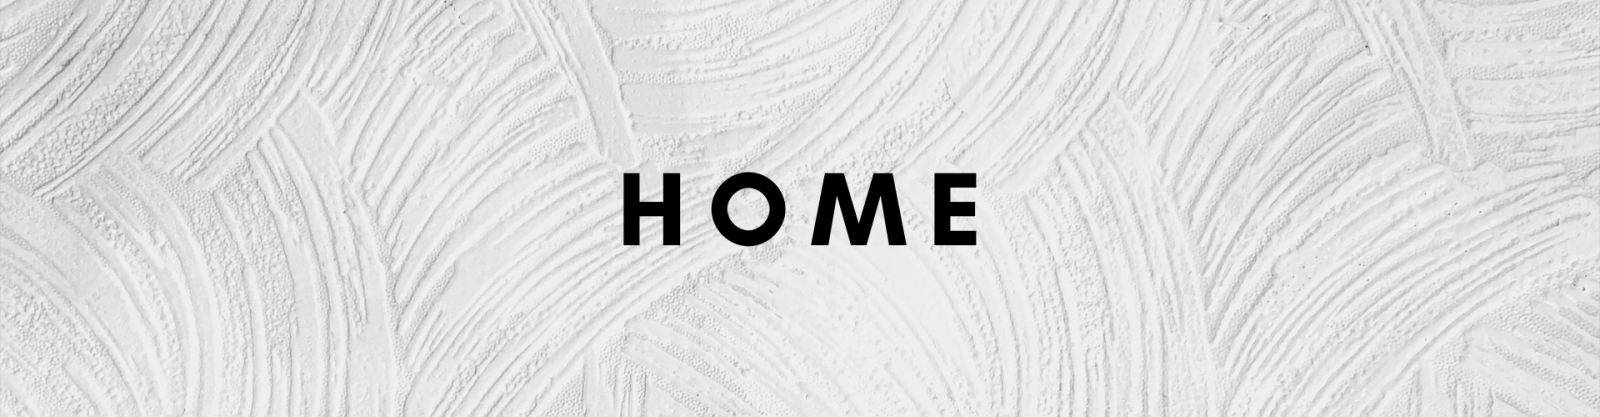 BANNER HOME